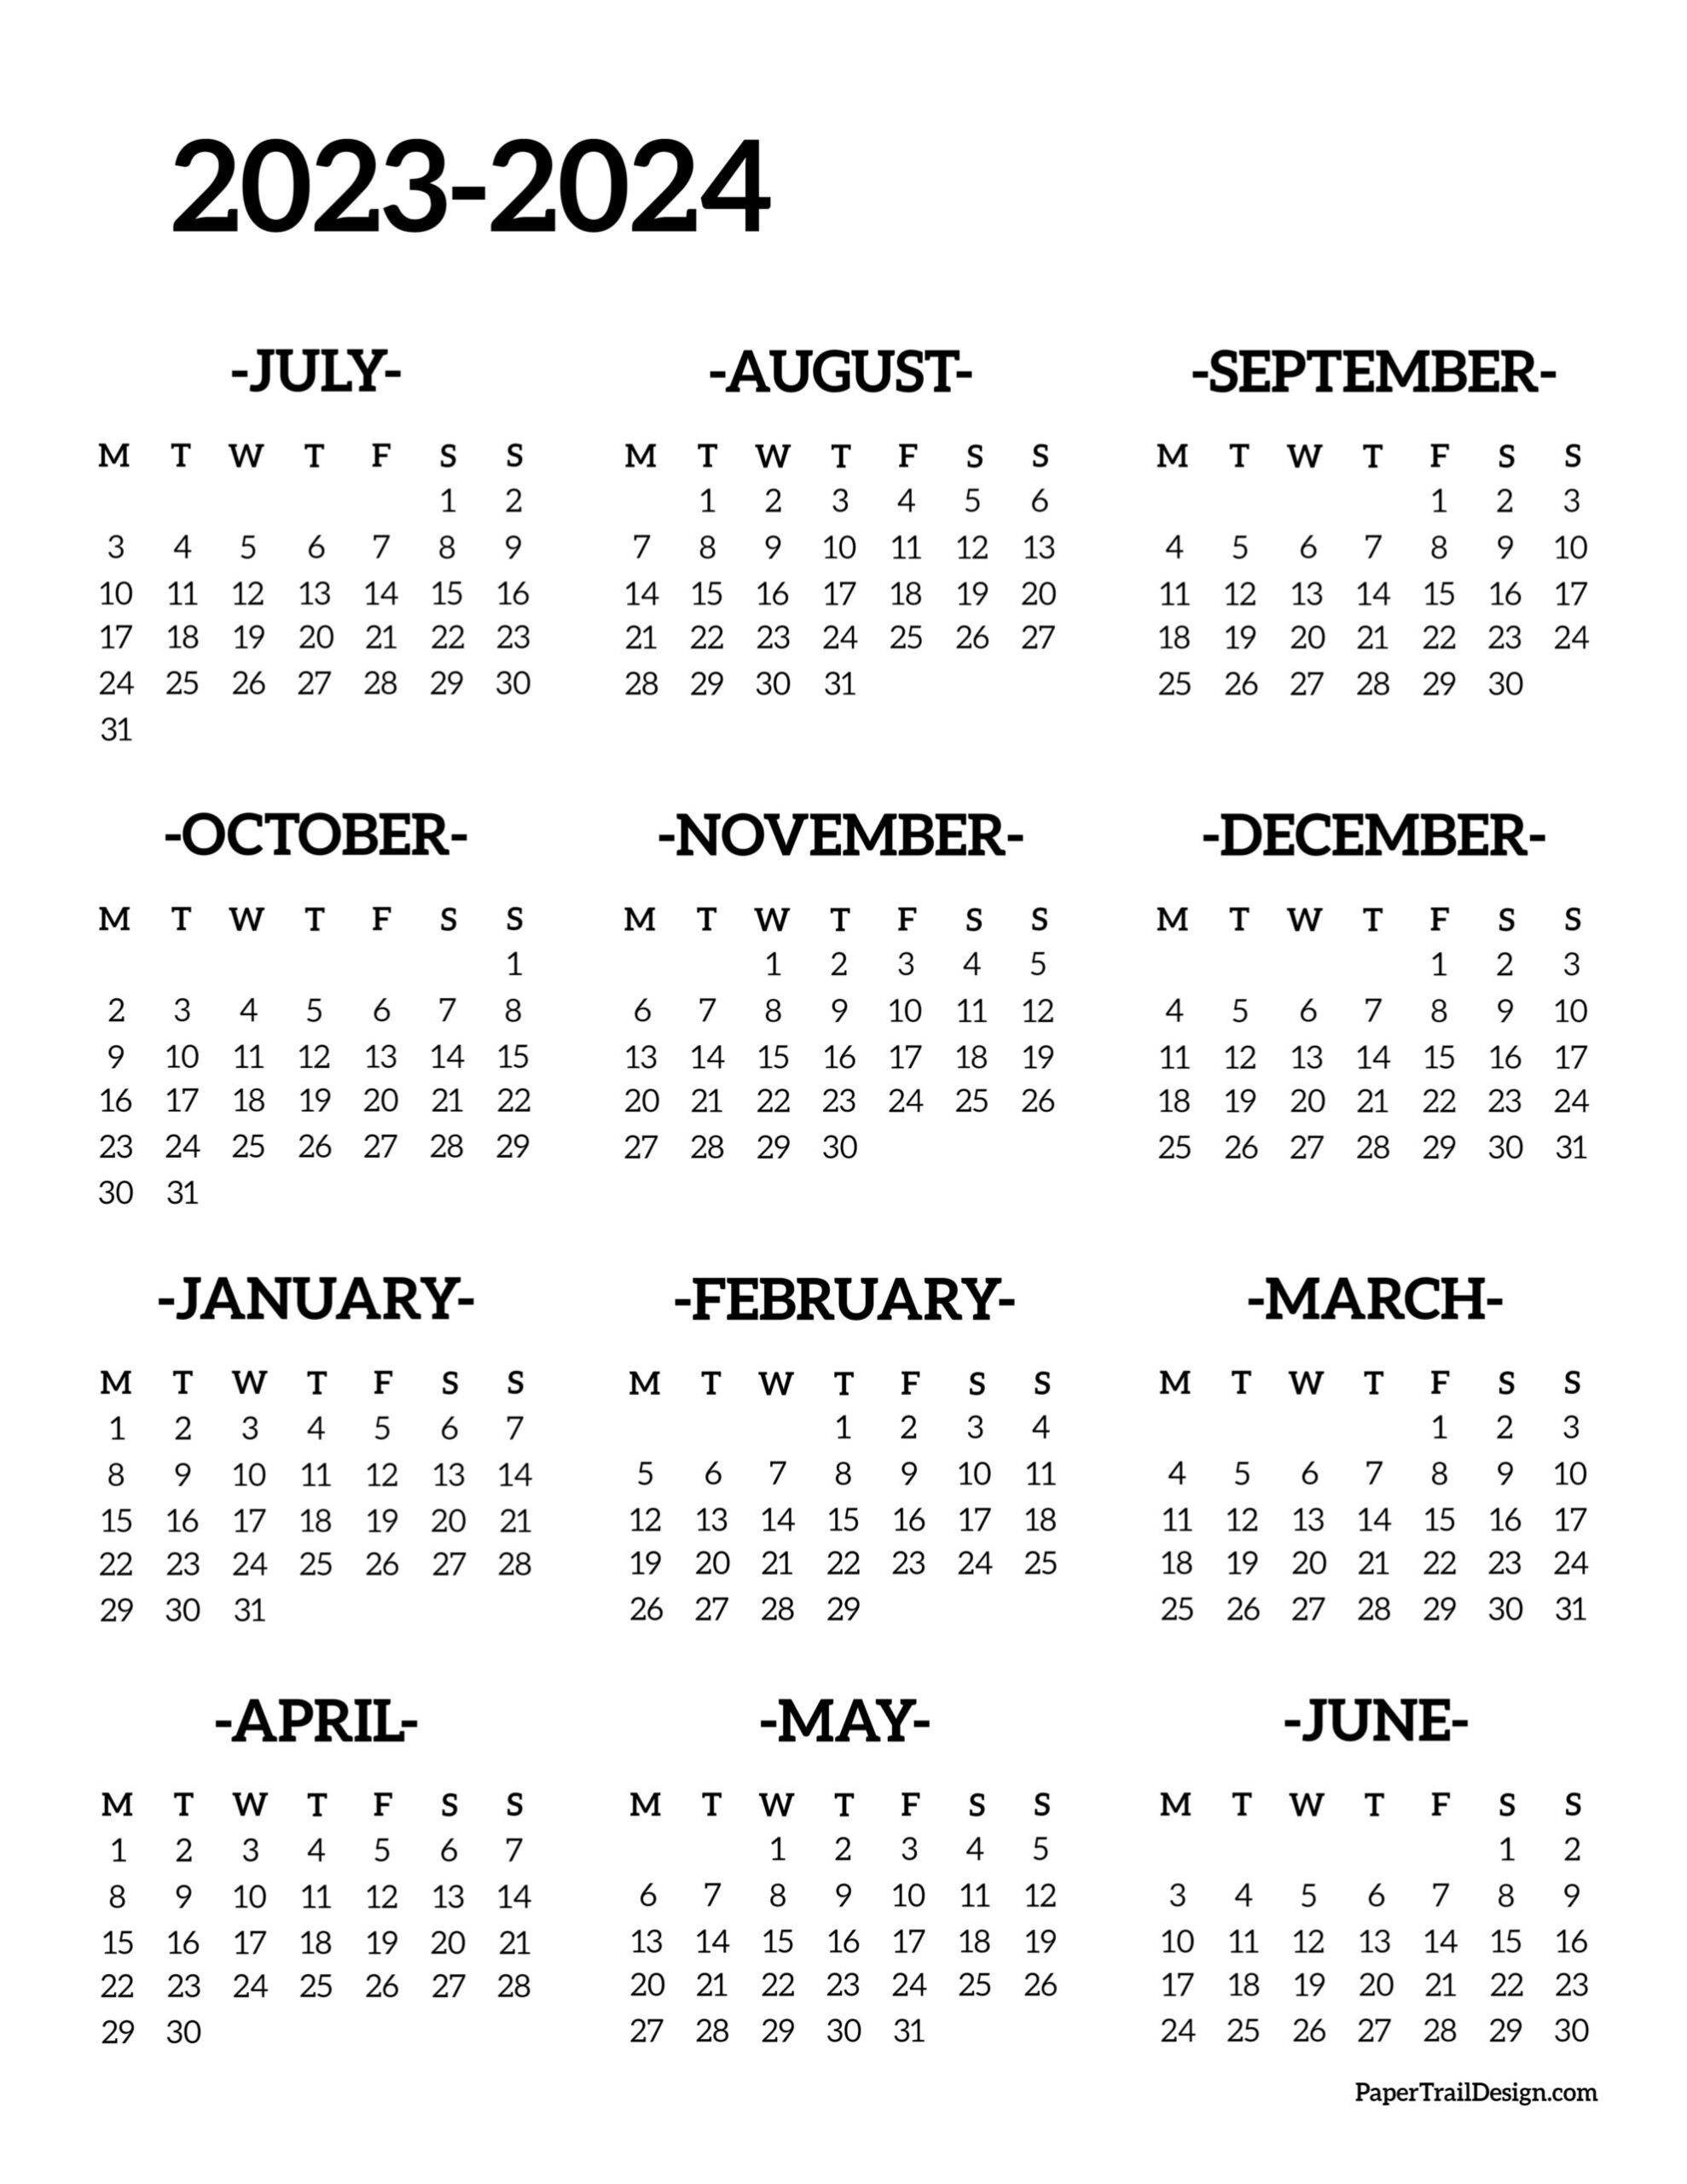 2023-2024 School Year Calendar Free Printable - Paper Trail Design with July 2023 To March 2024 Calendar